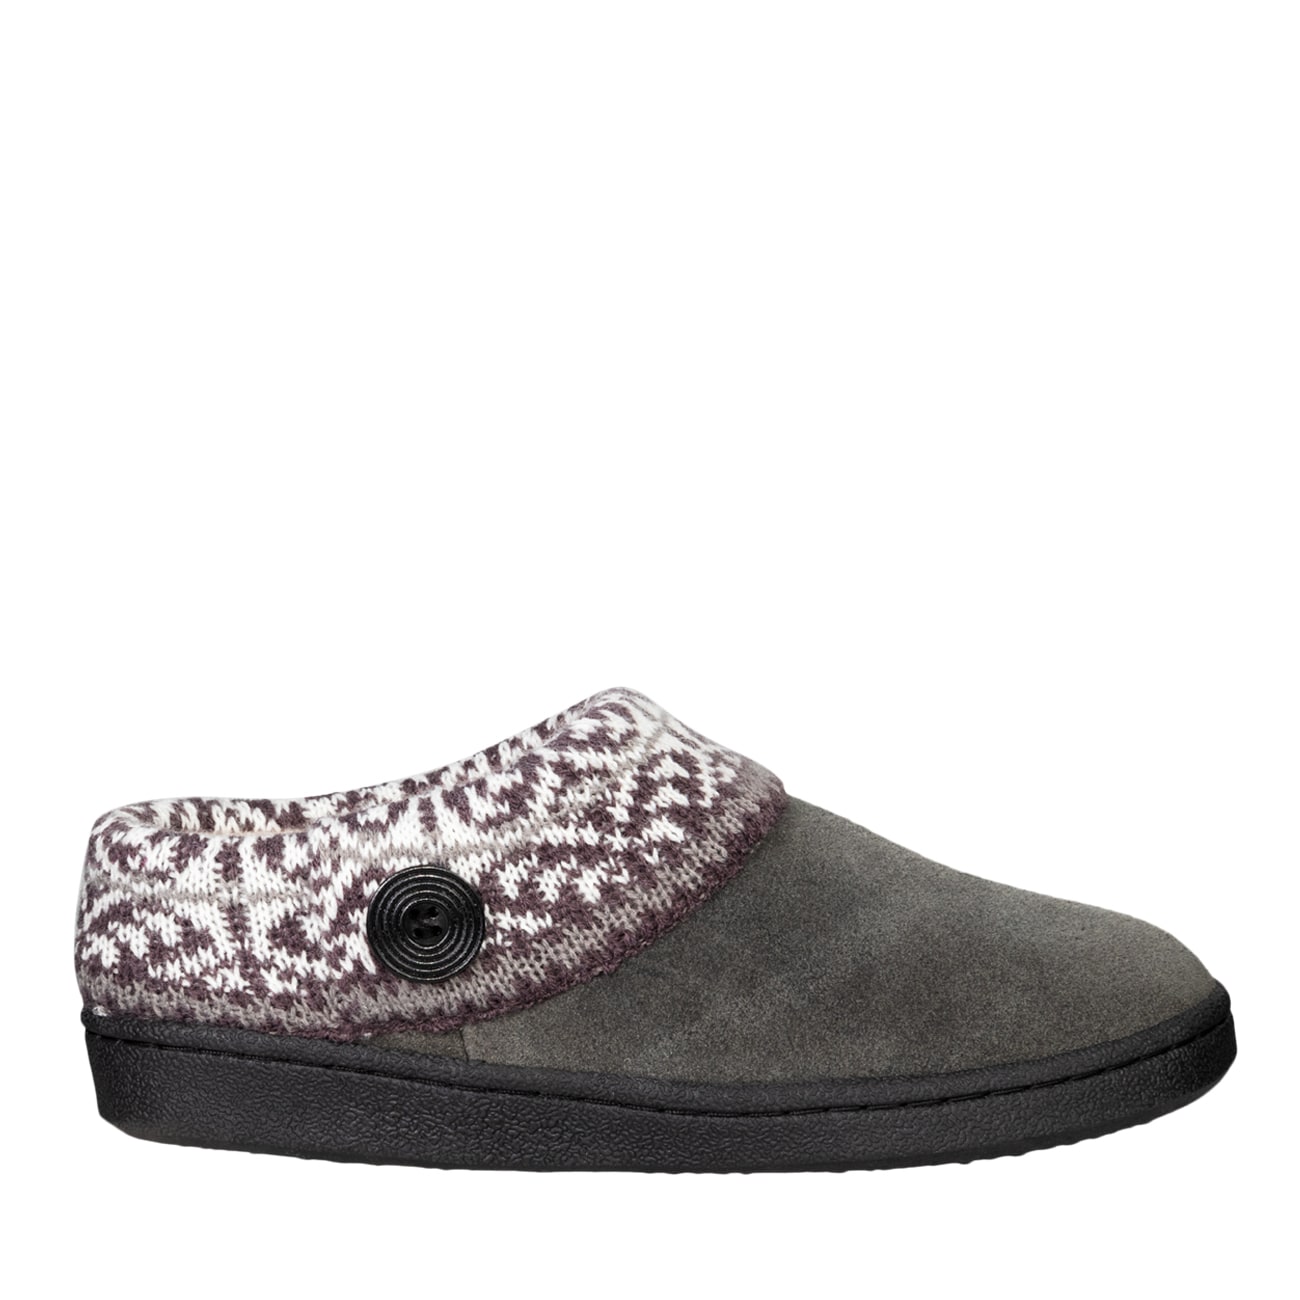 clarks slippers canada